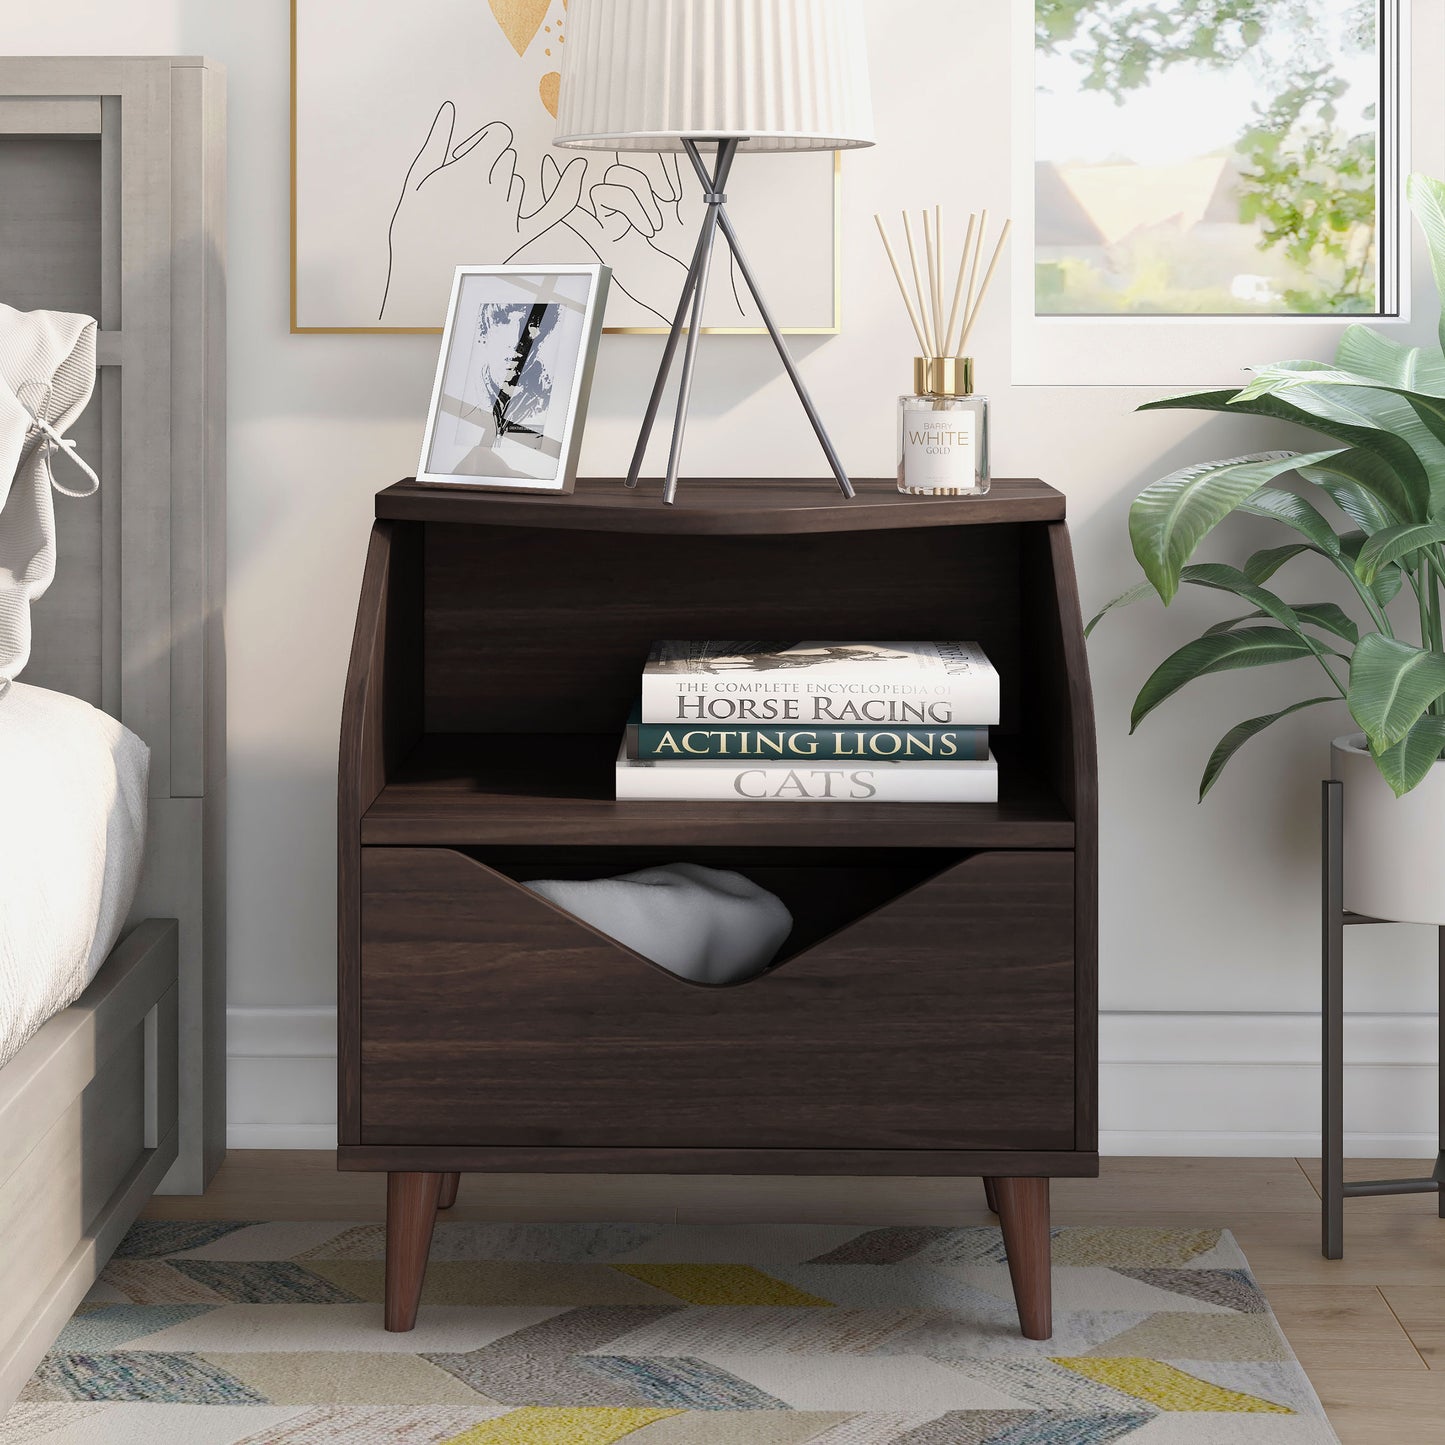 Front-facing mid-century modern wenge one-drawer end table in a bedroom with accessories